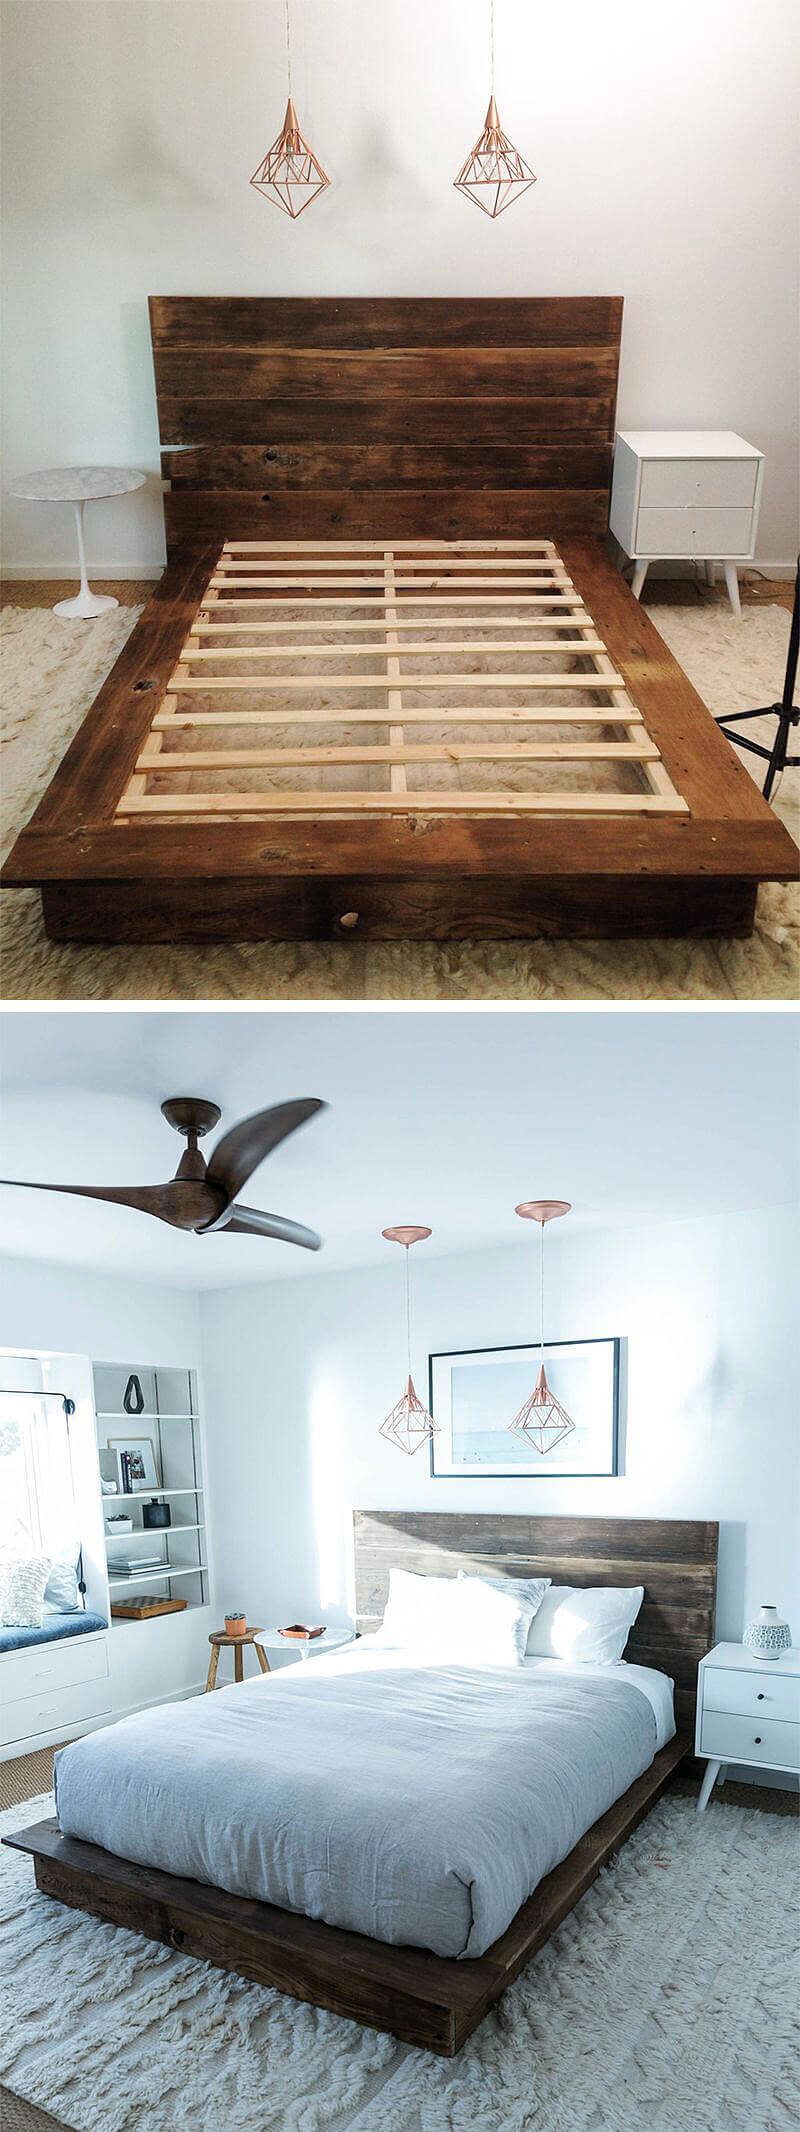 Simple Wooden Bed Frame and Headboard